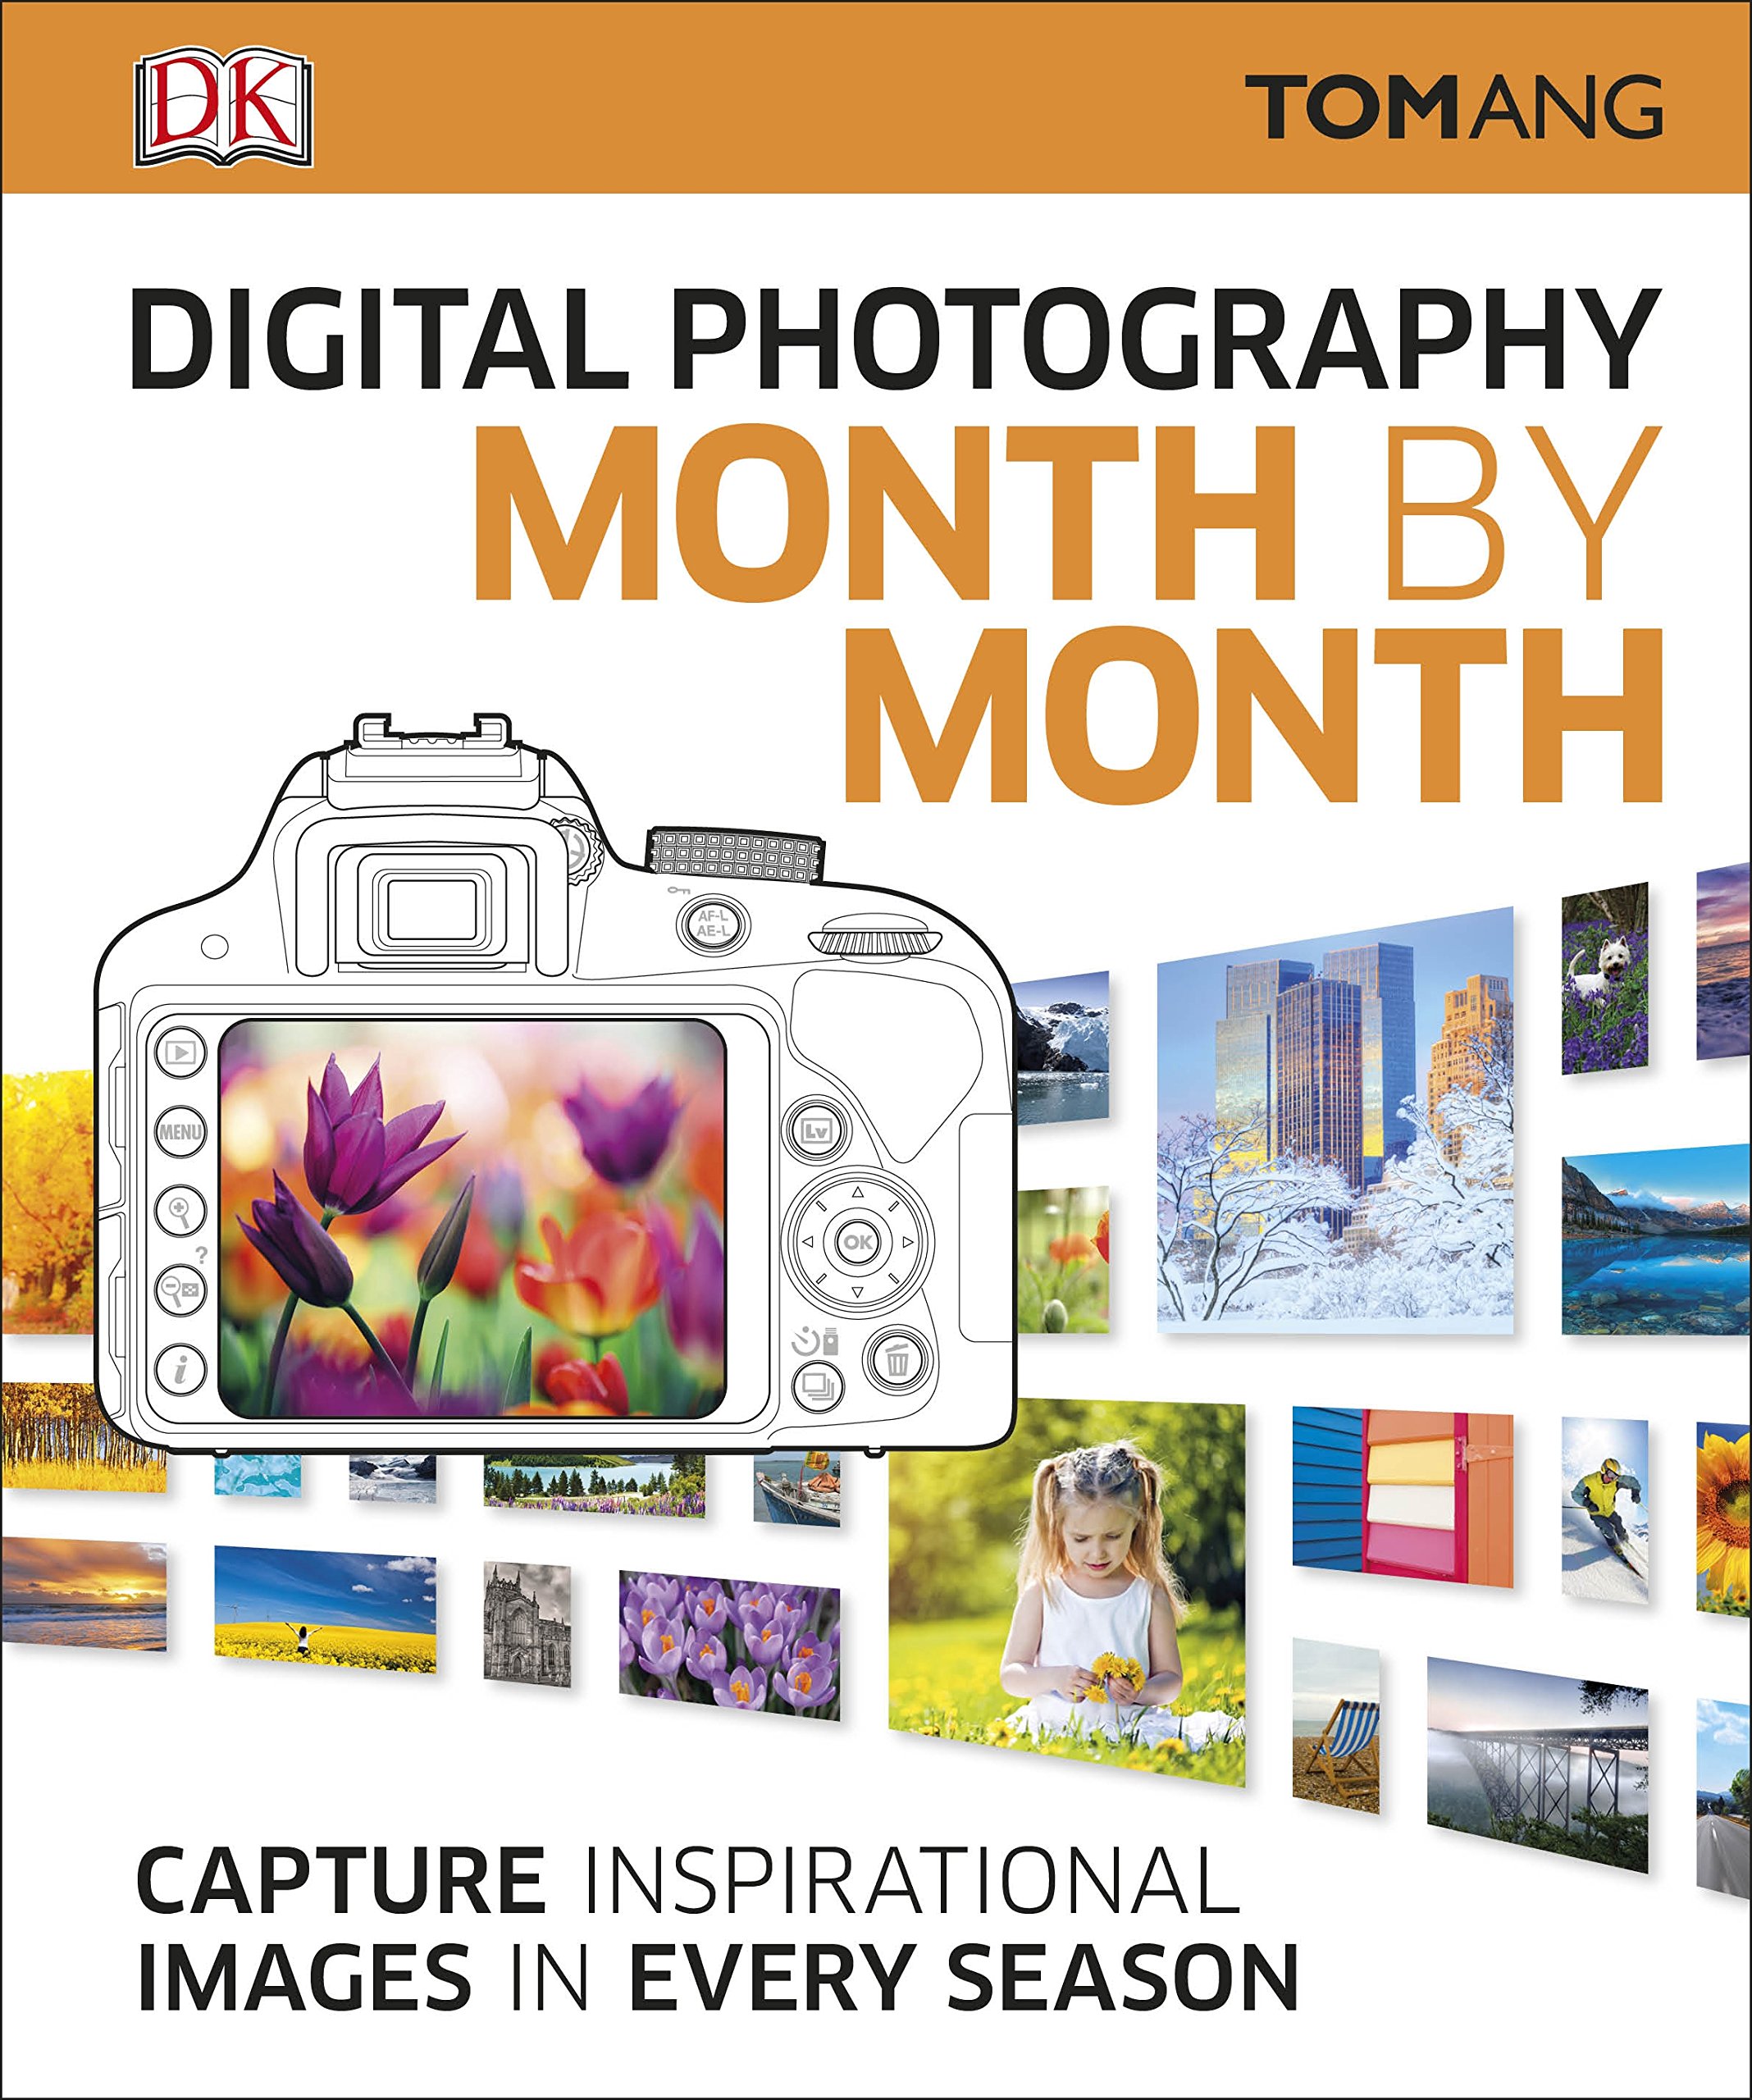 Digital Photography Month by Month | Tom Ang